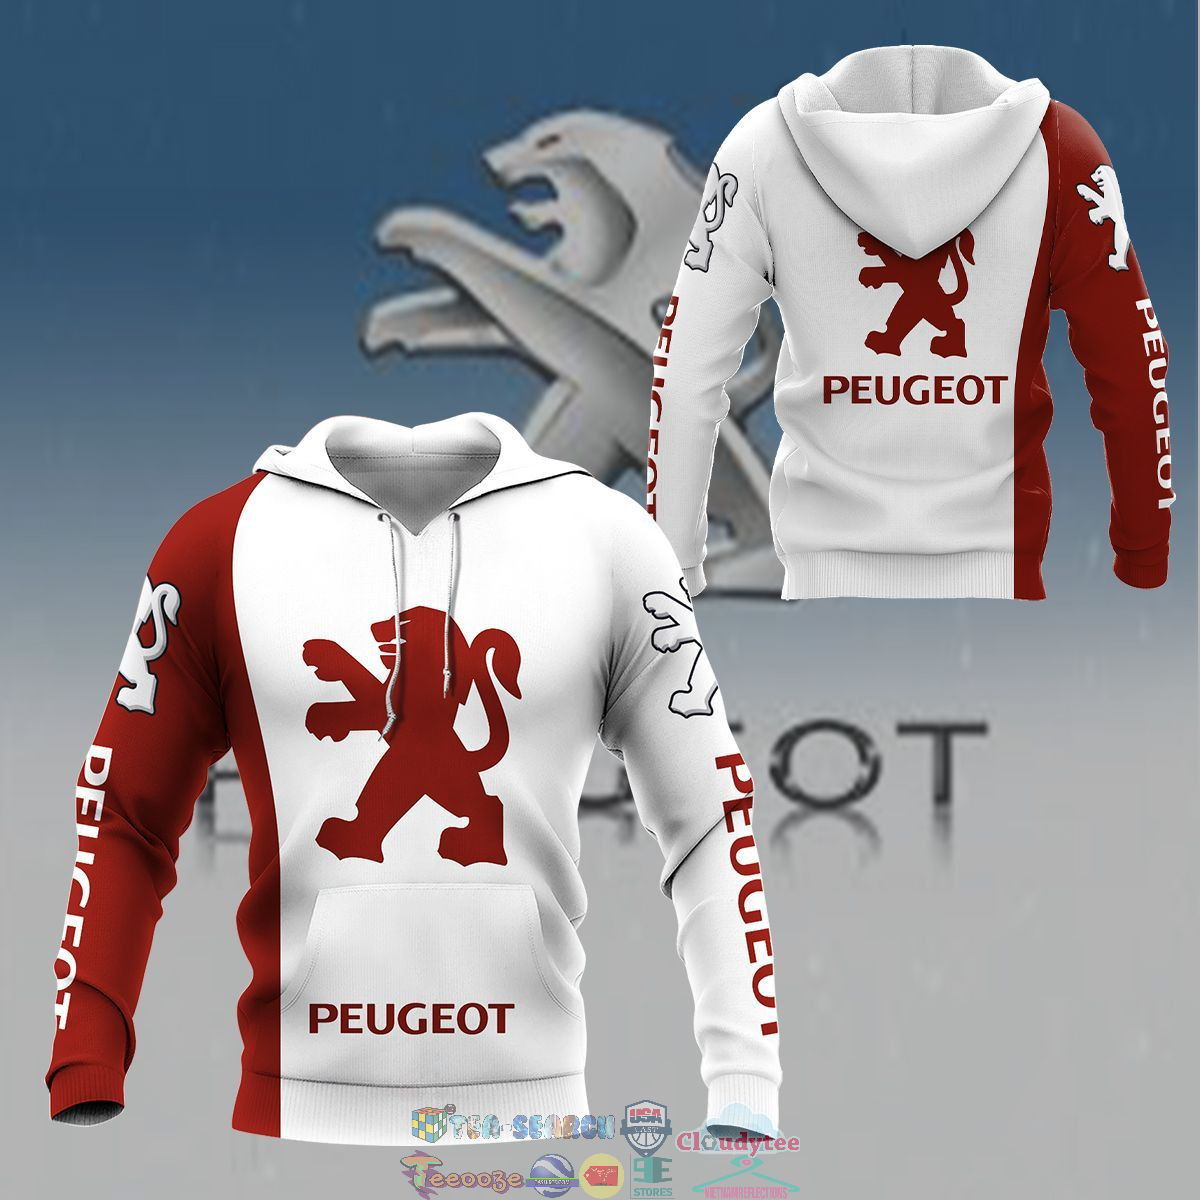 zG7CCTLw-TH170822-29xxxPeugeot-ver-8-3D-hoodie-and-t-shirt3.jpg